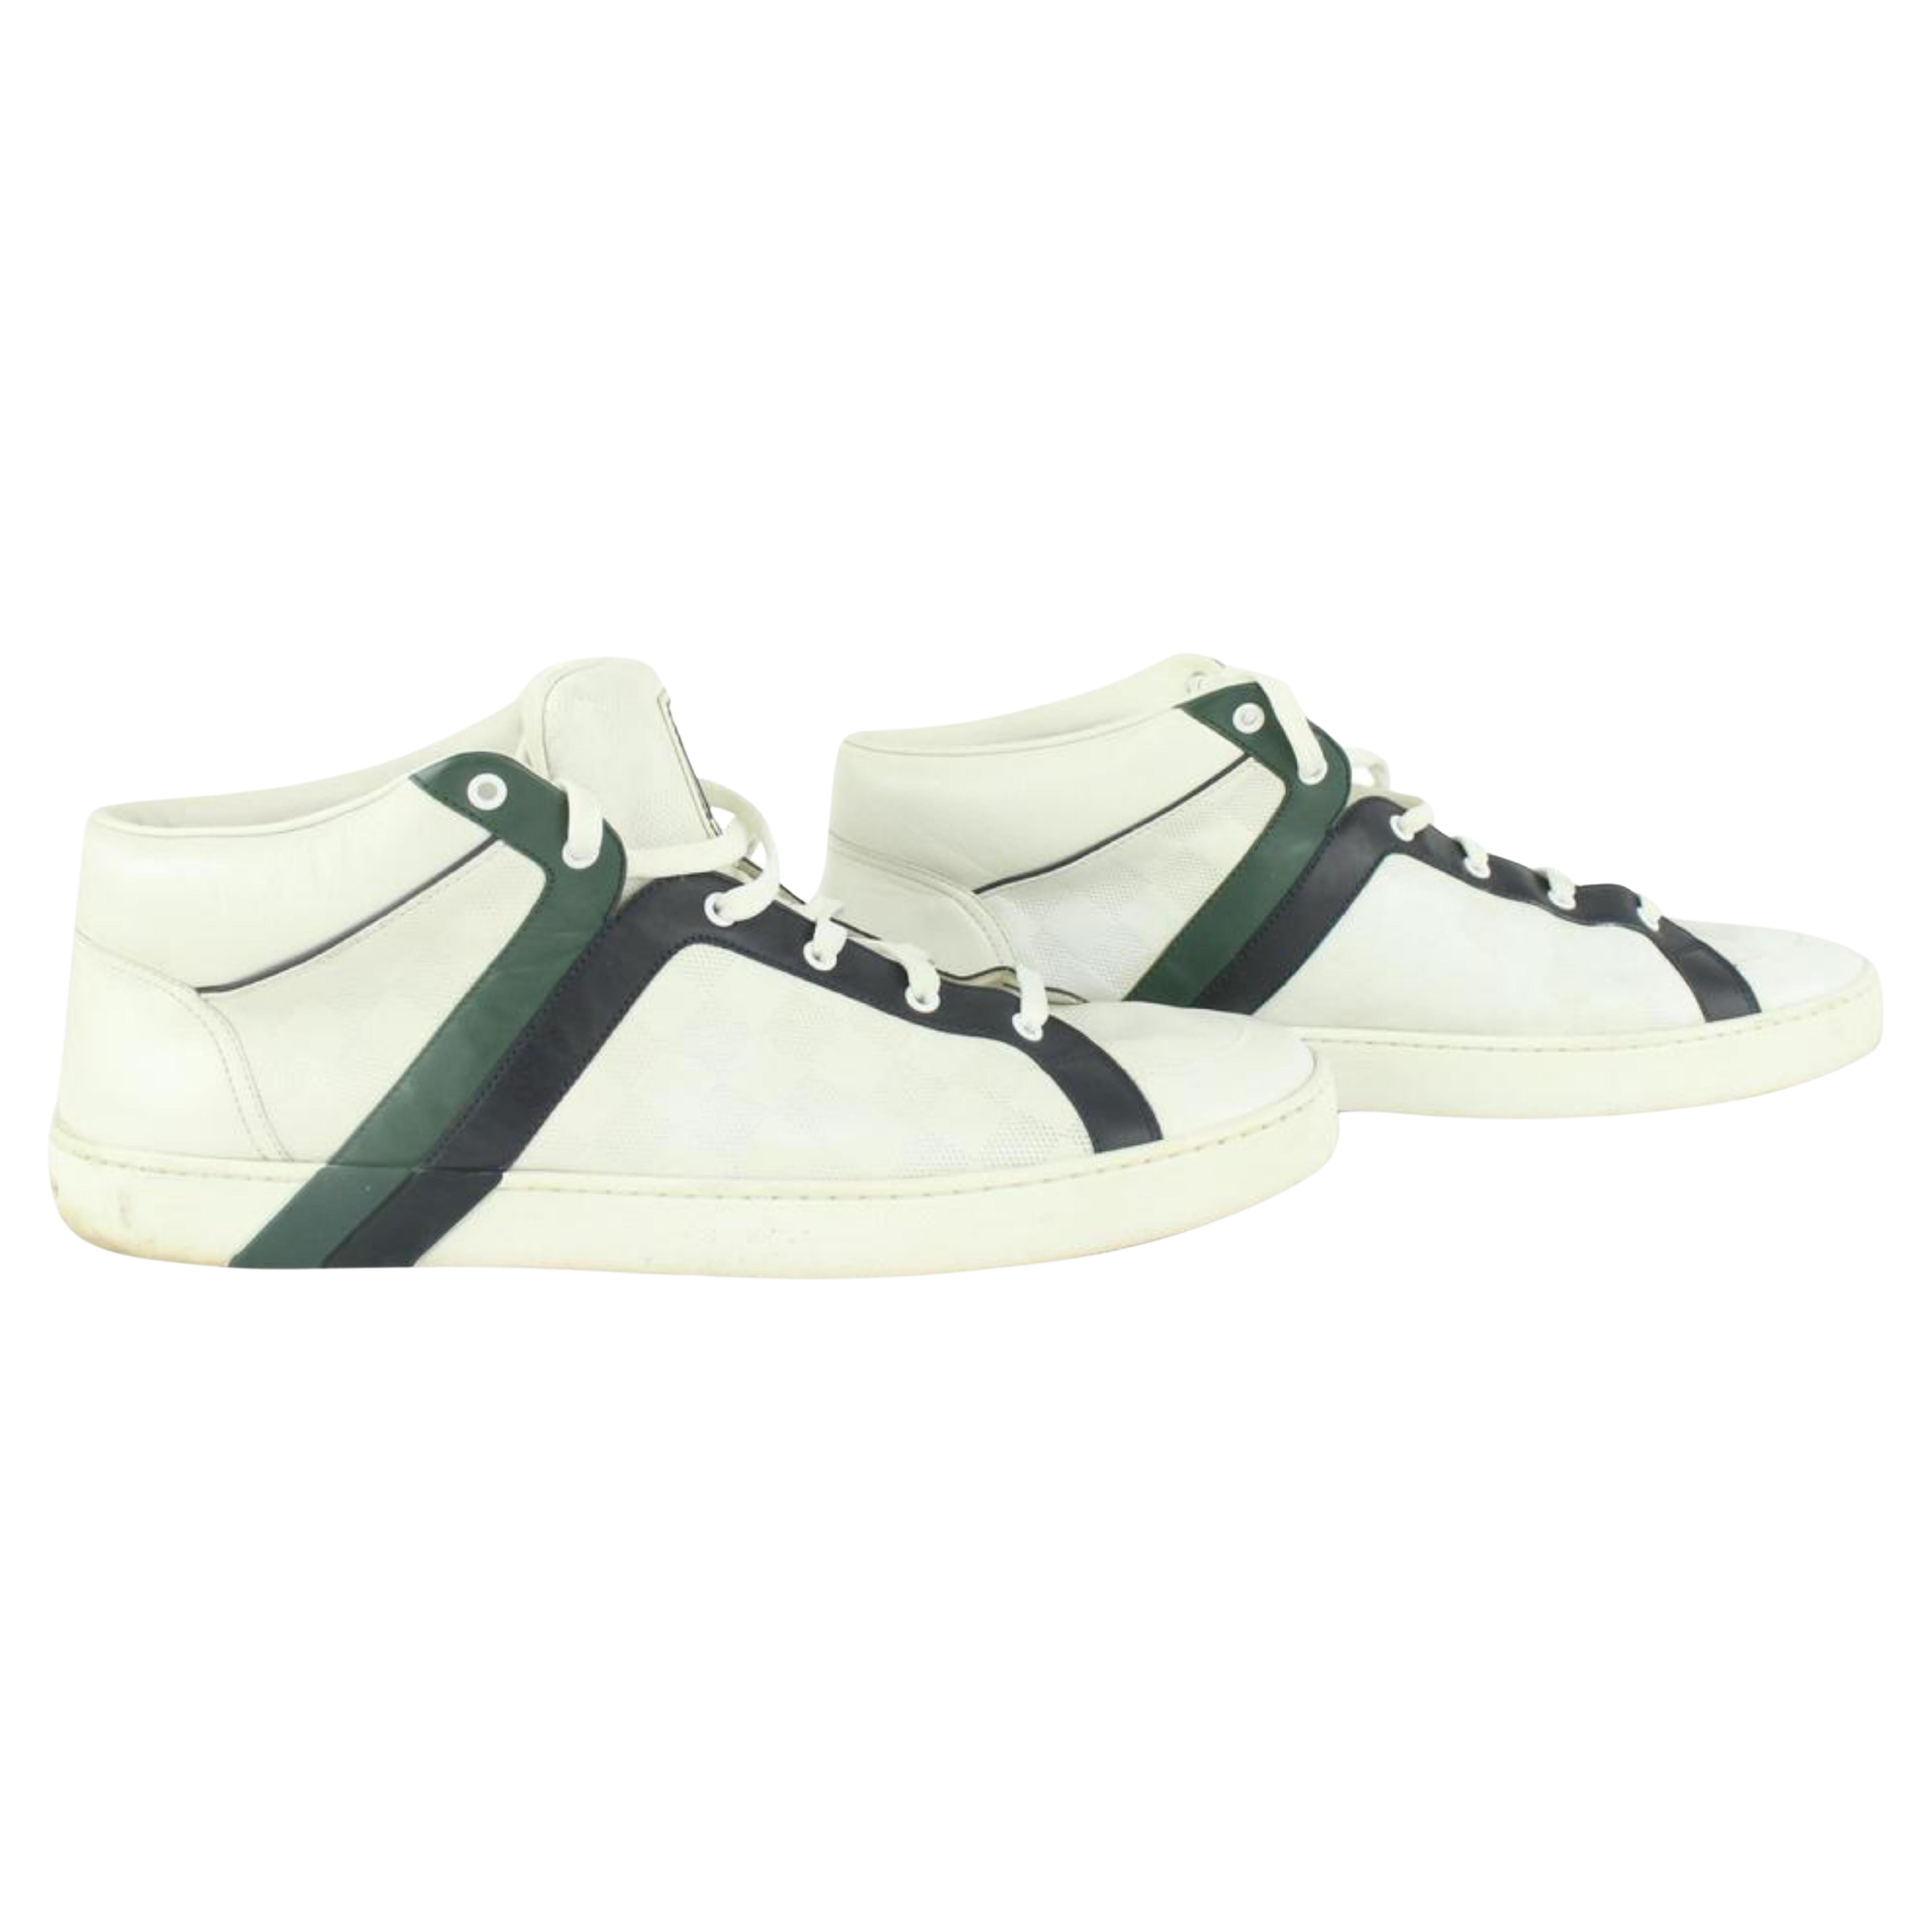 Louis Vuitton Tennis Shoes - 5 For Sale on 1stDibs